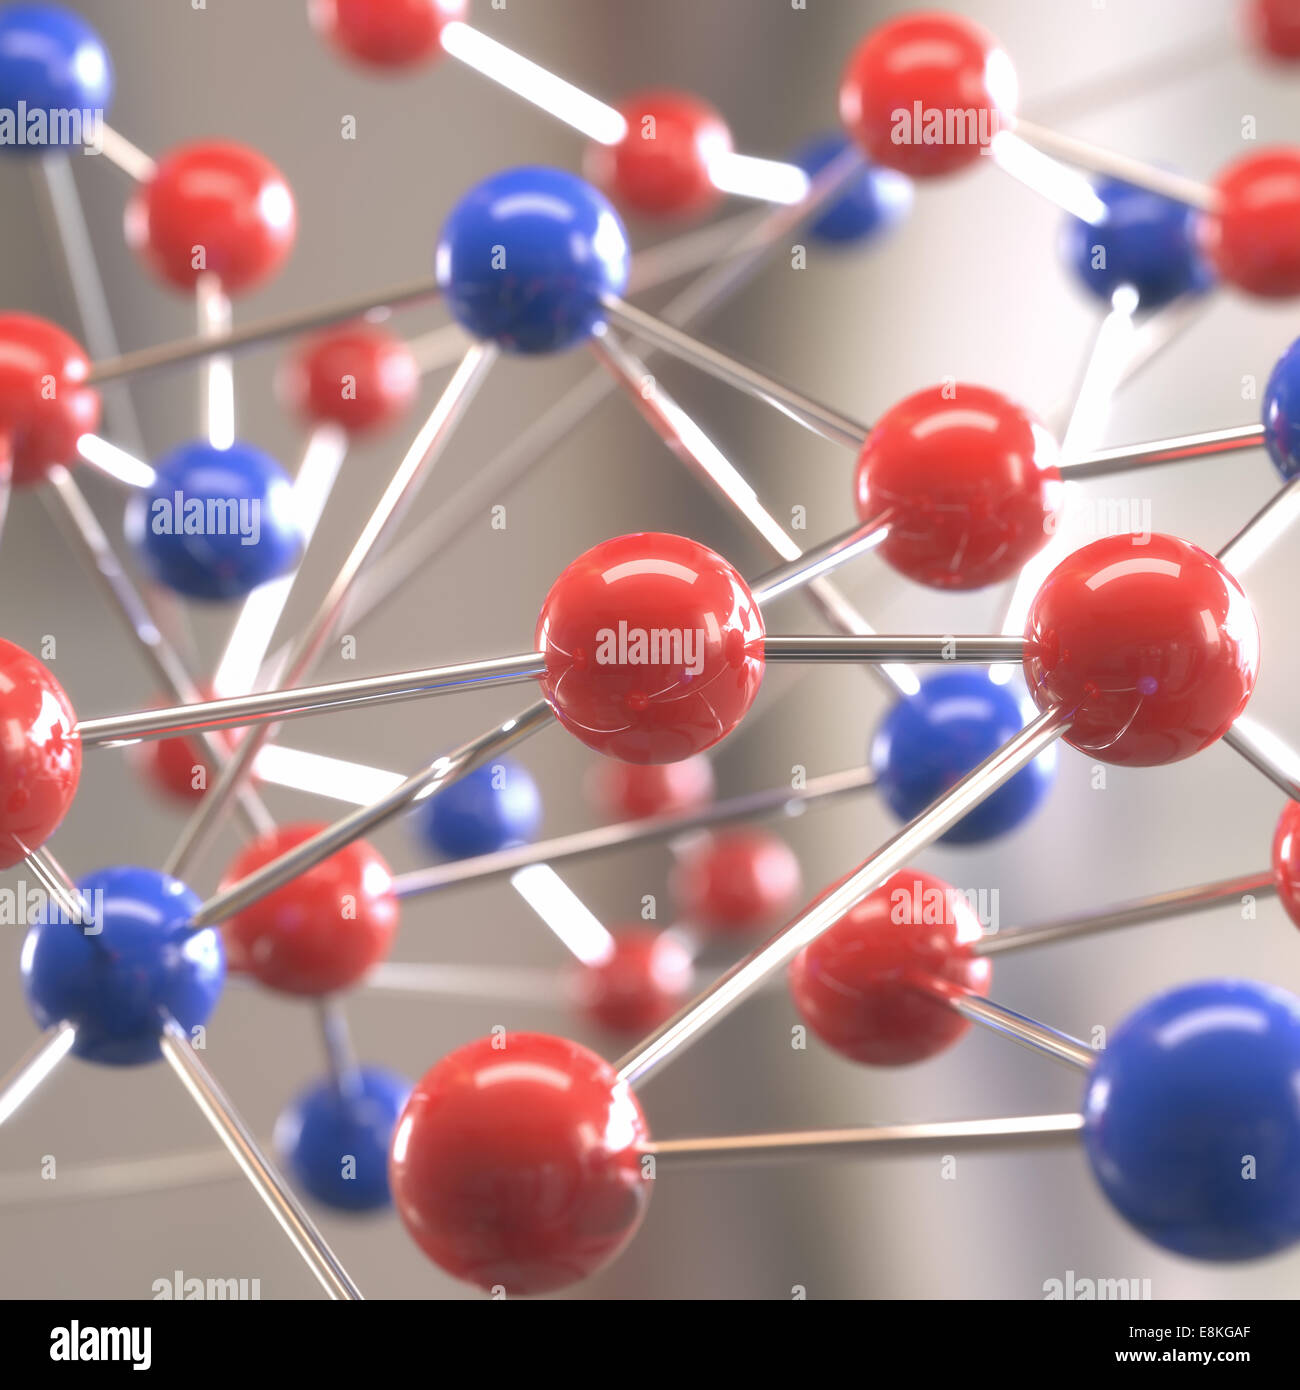 Molecular structure with spheres interconnected with depth of field. Stock Photo